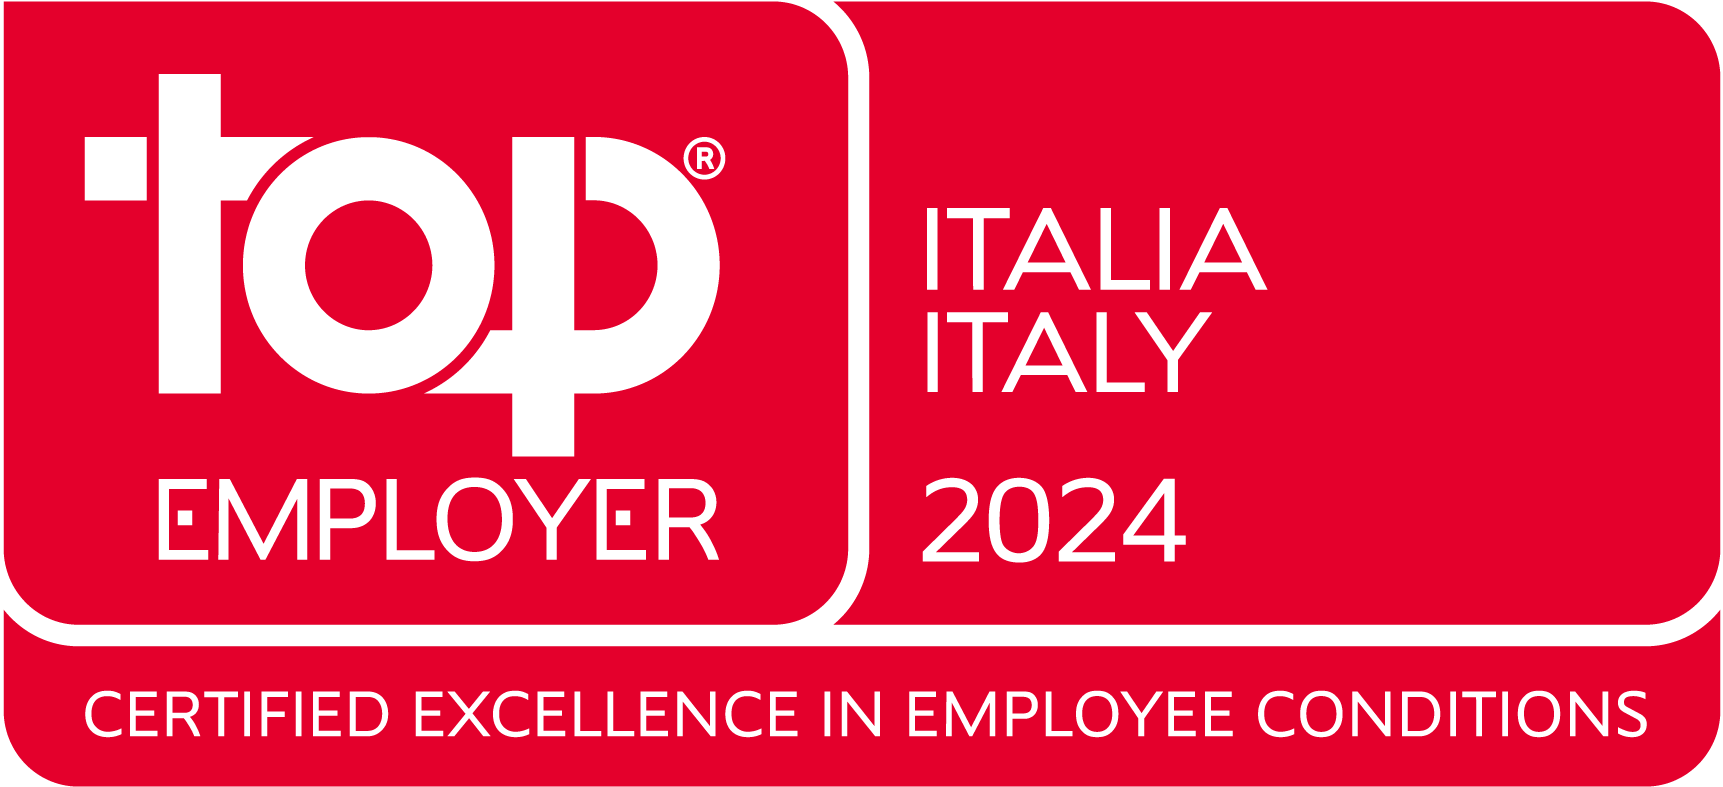 Top_Employer_Italy_2024.png